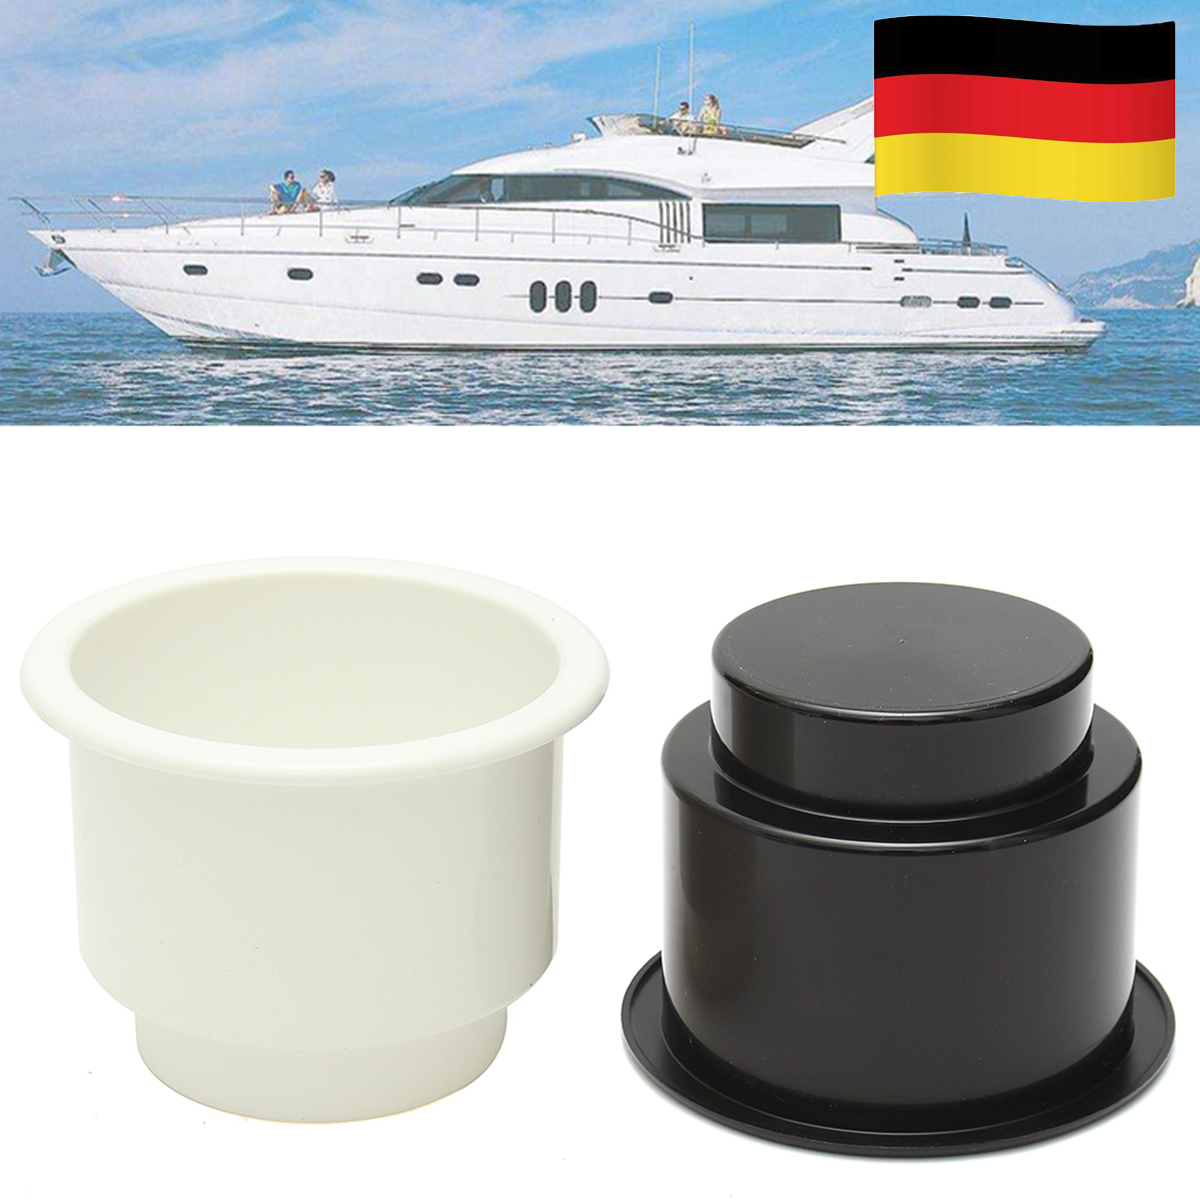 Plastic-Cup-Drink-Can-Beverage-Water-Bottle-Holder-Recessed-Mount-for-Marine-Boat-RV-Car-1218768